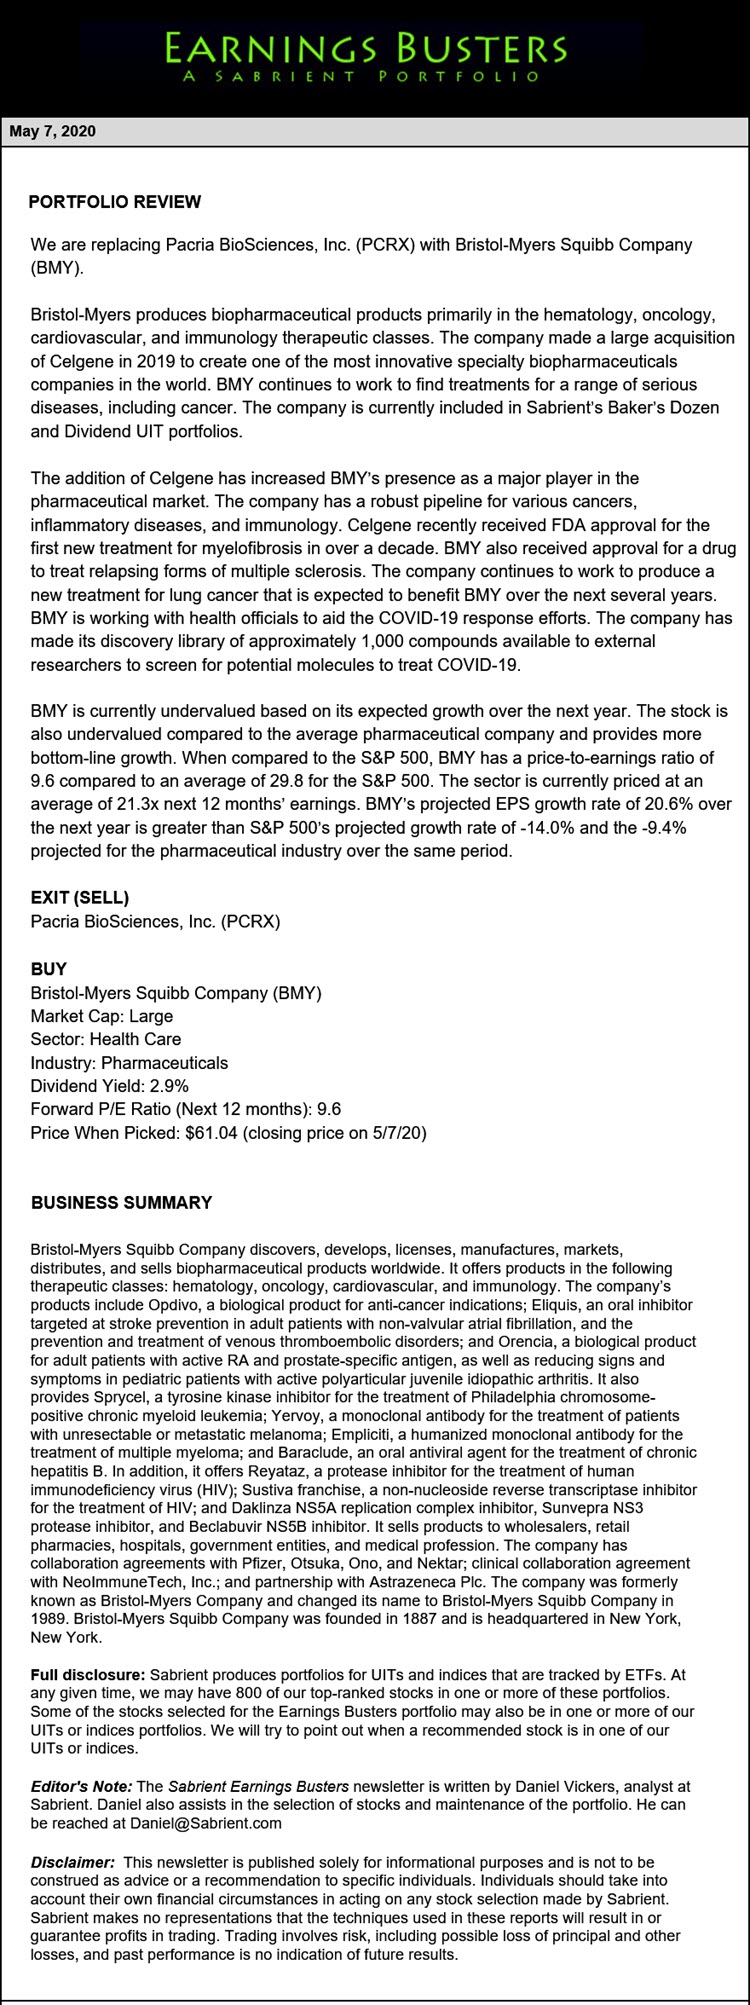 Earnings Busters Newsletter - May 7, 2020